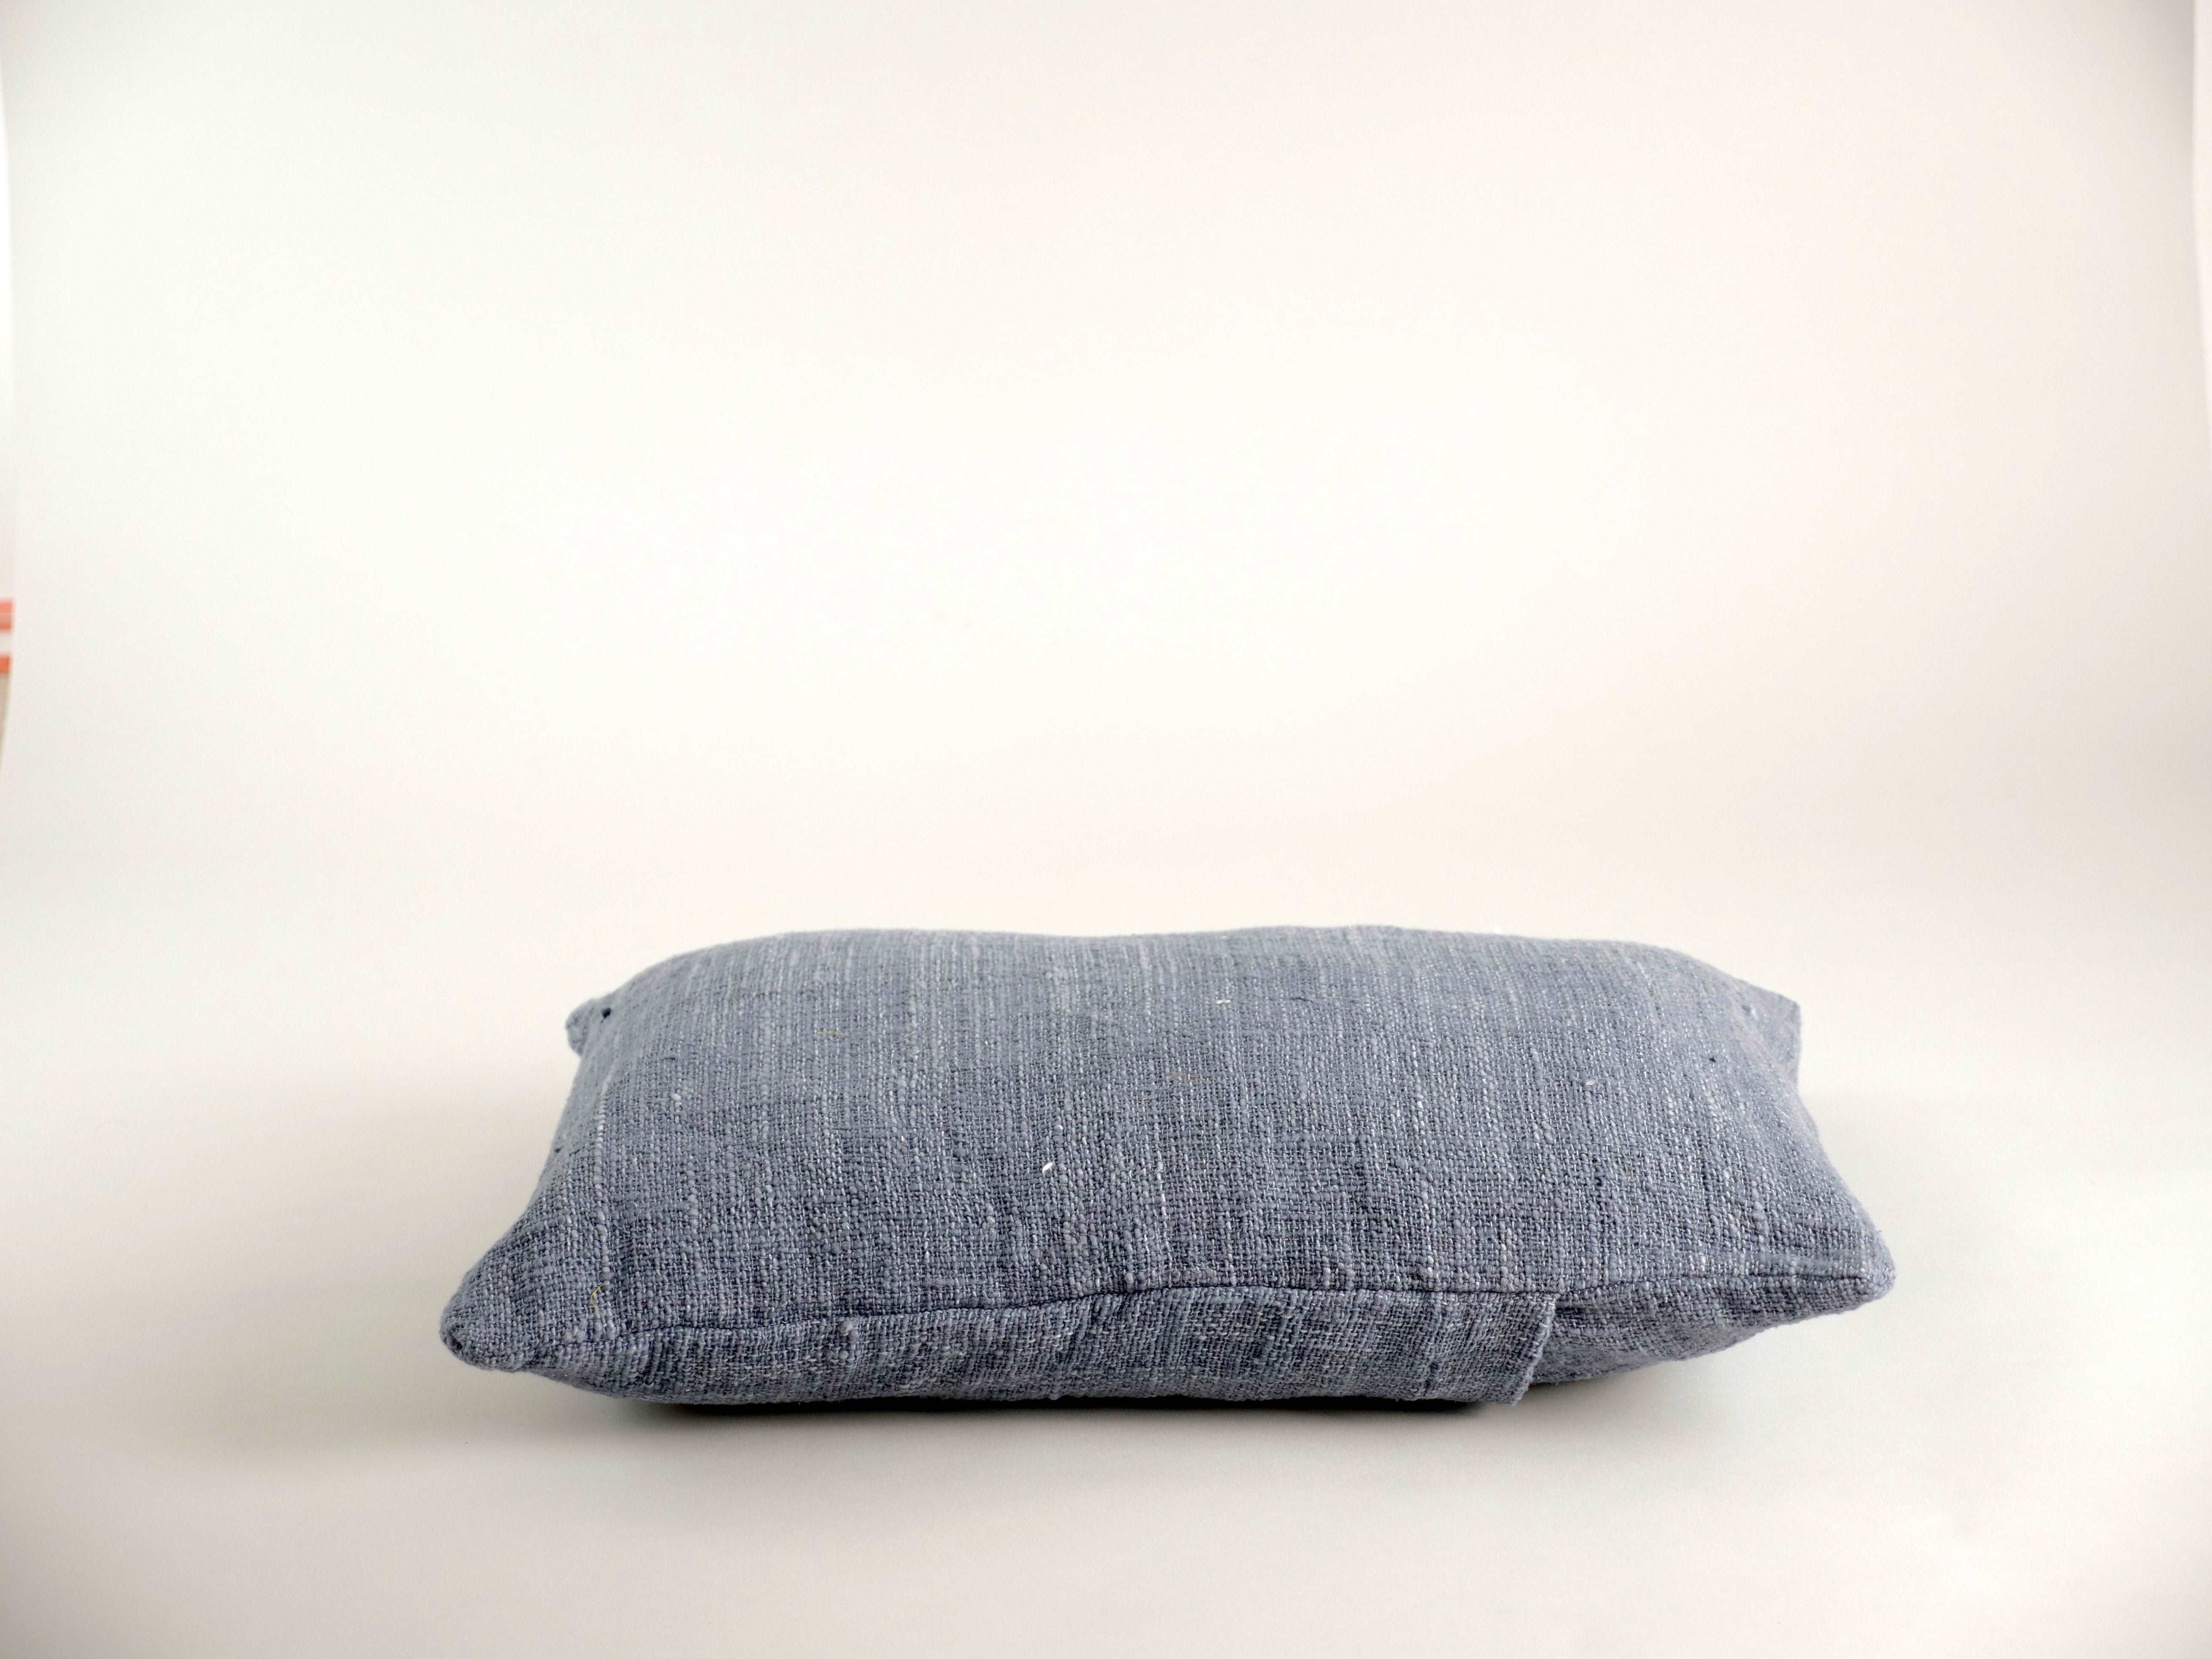 Cushion cover in handloomed recycled cotton. Indigo. 